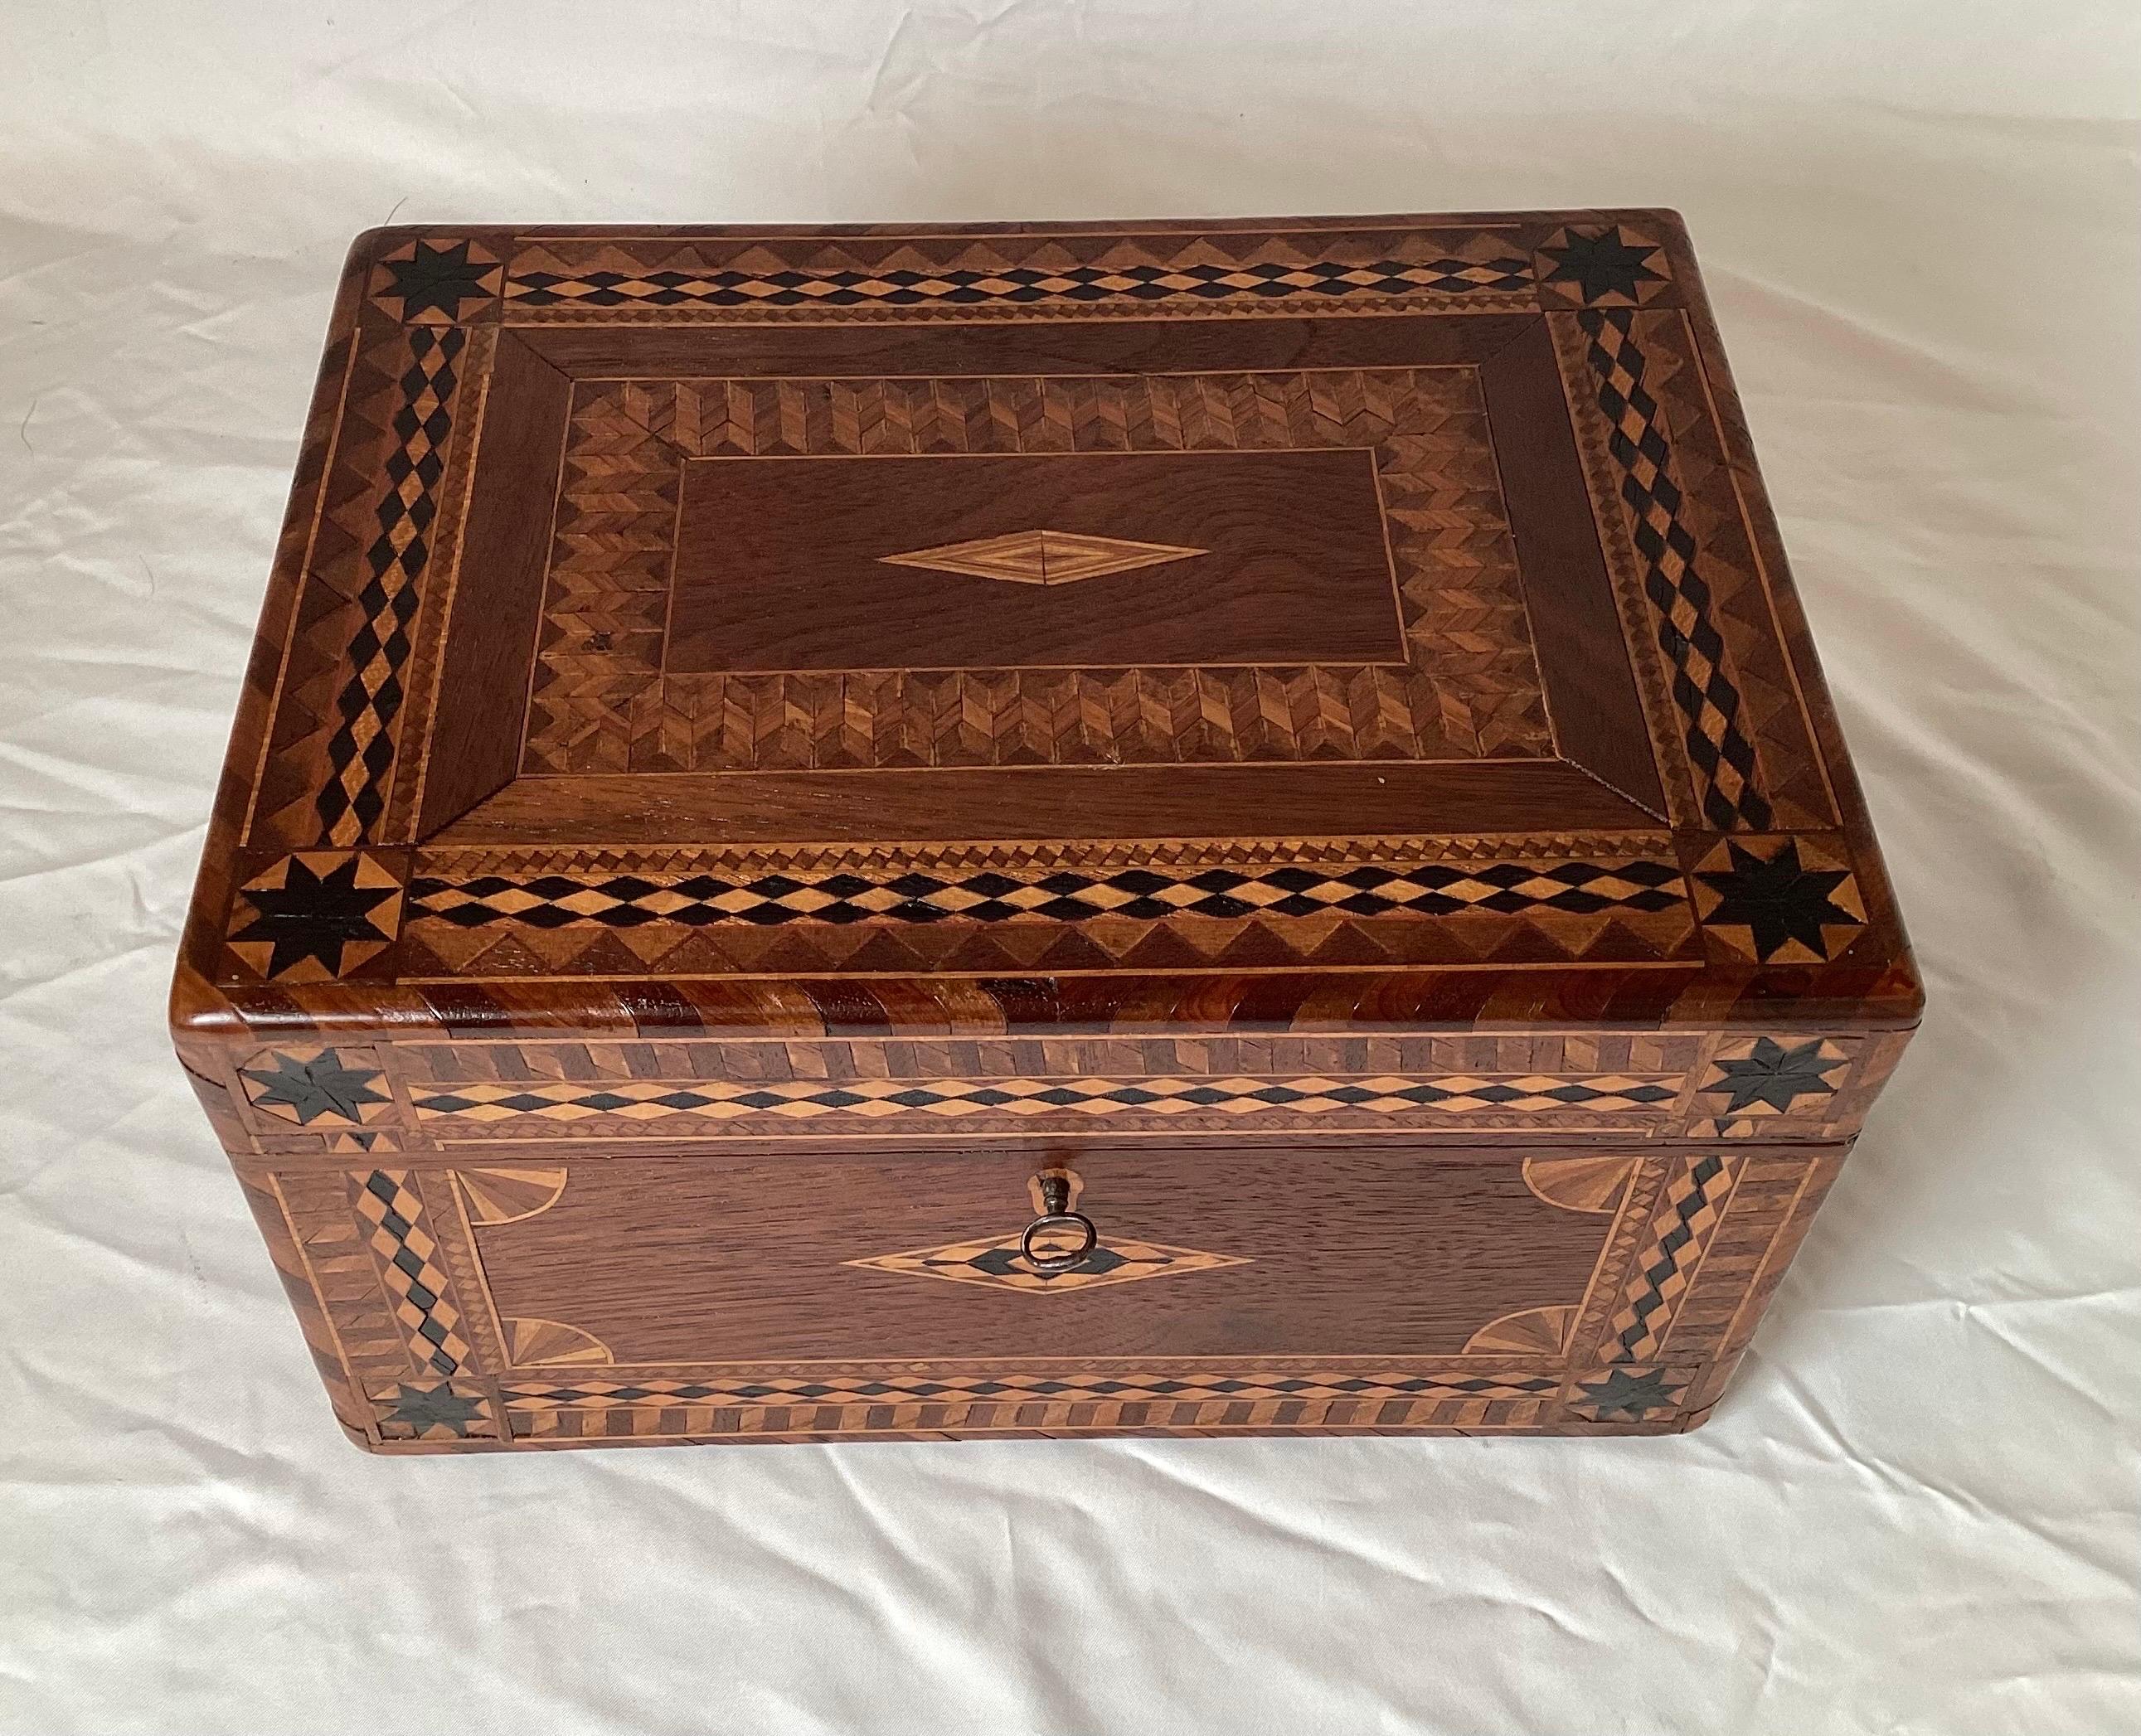 Beautiful intricate inlaid exotic wood jewelry box with tray and oval mirror. Eight sided ebony star decoration with smooth corners. Has working key.